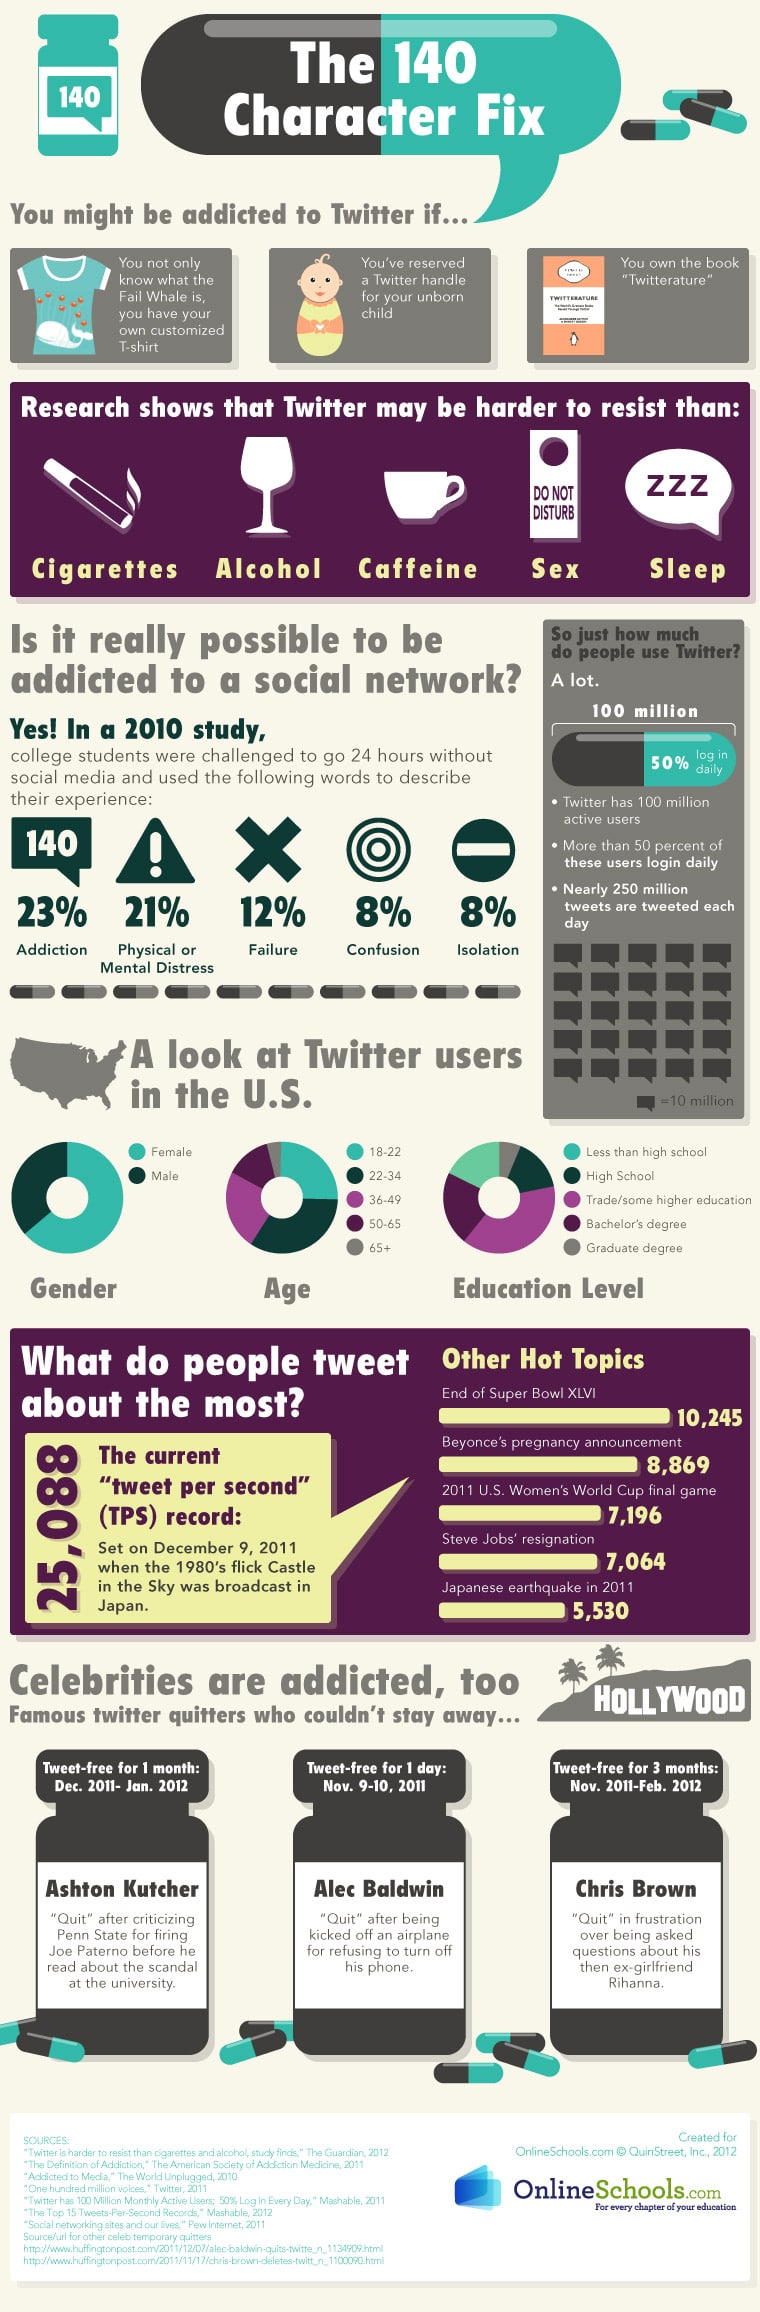 The 140 Character Fix: Twitter Addiction Explained [Infographic]